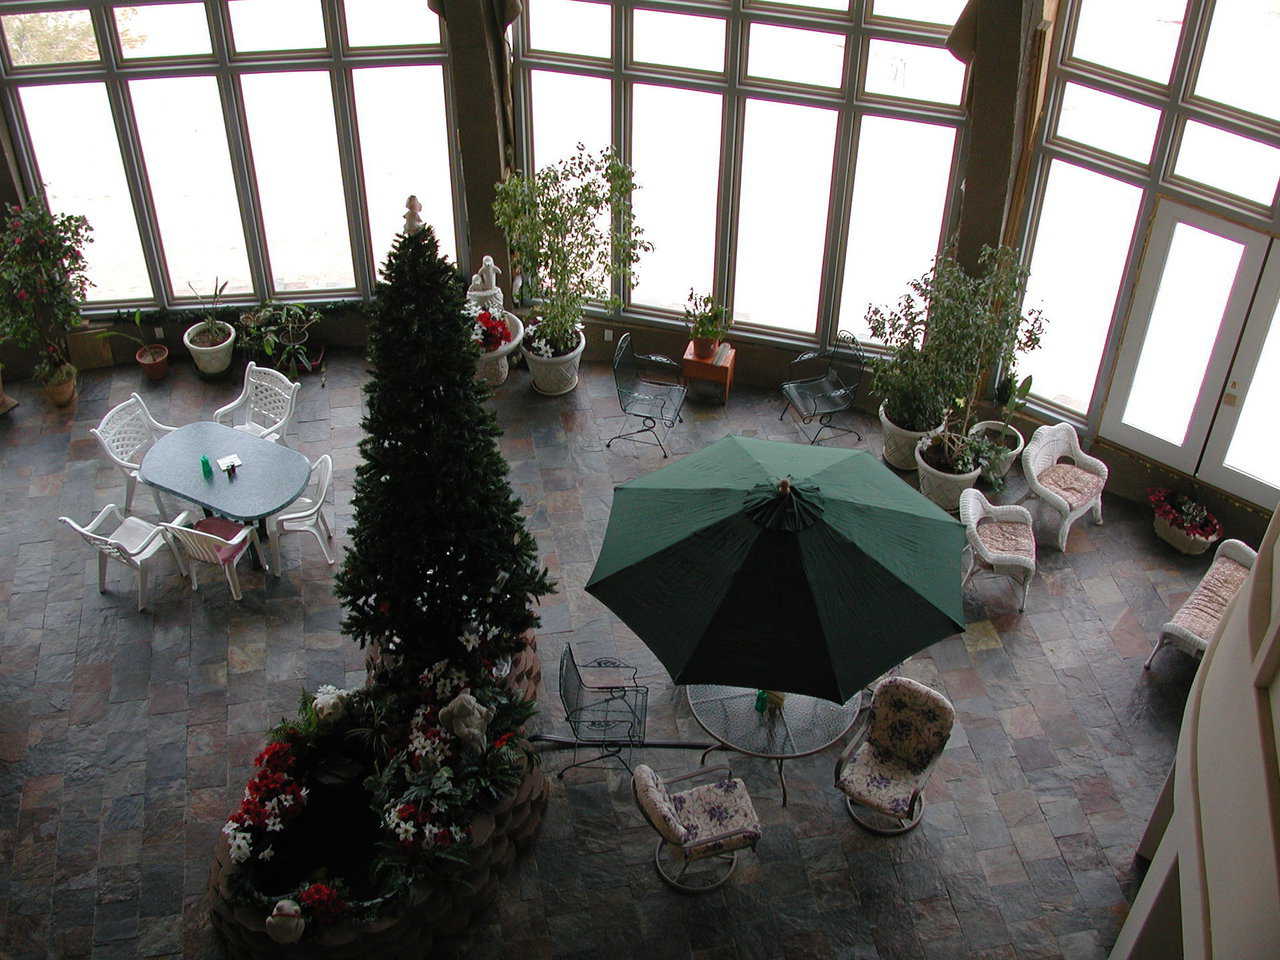 Christmas preparations — Atrium is decorated for the holidays.